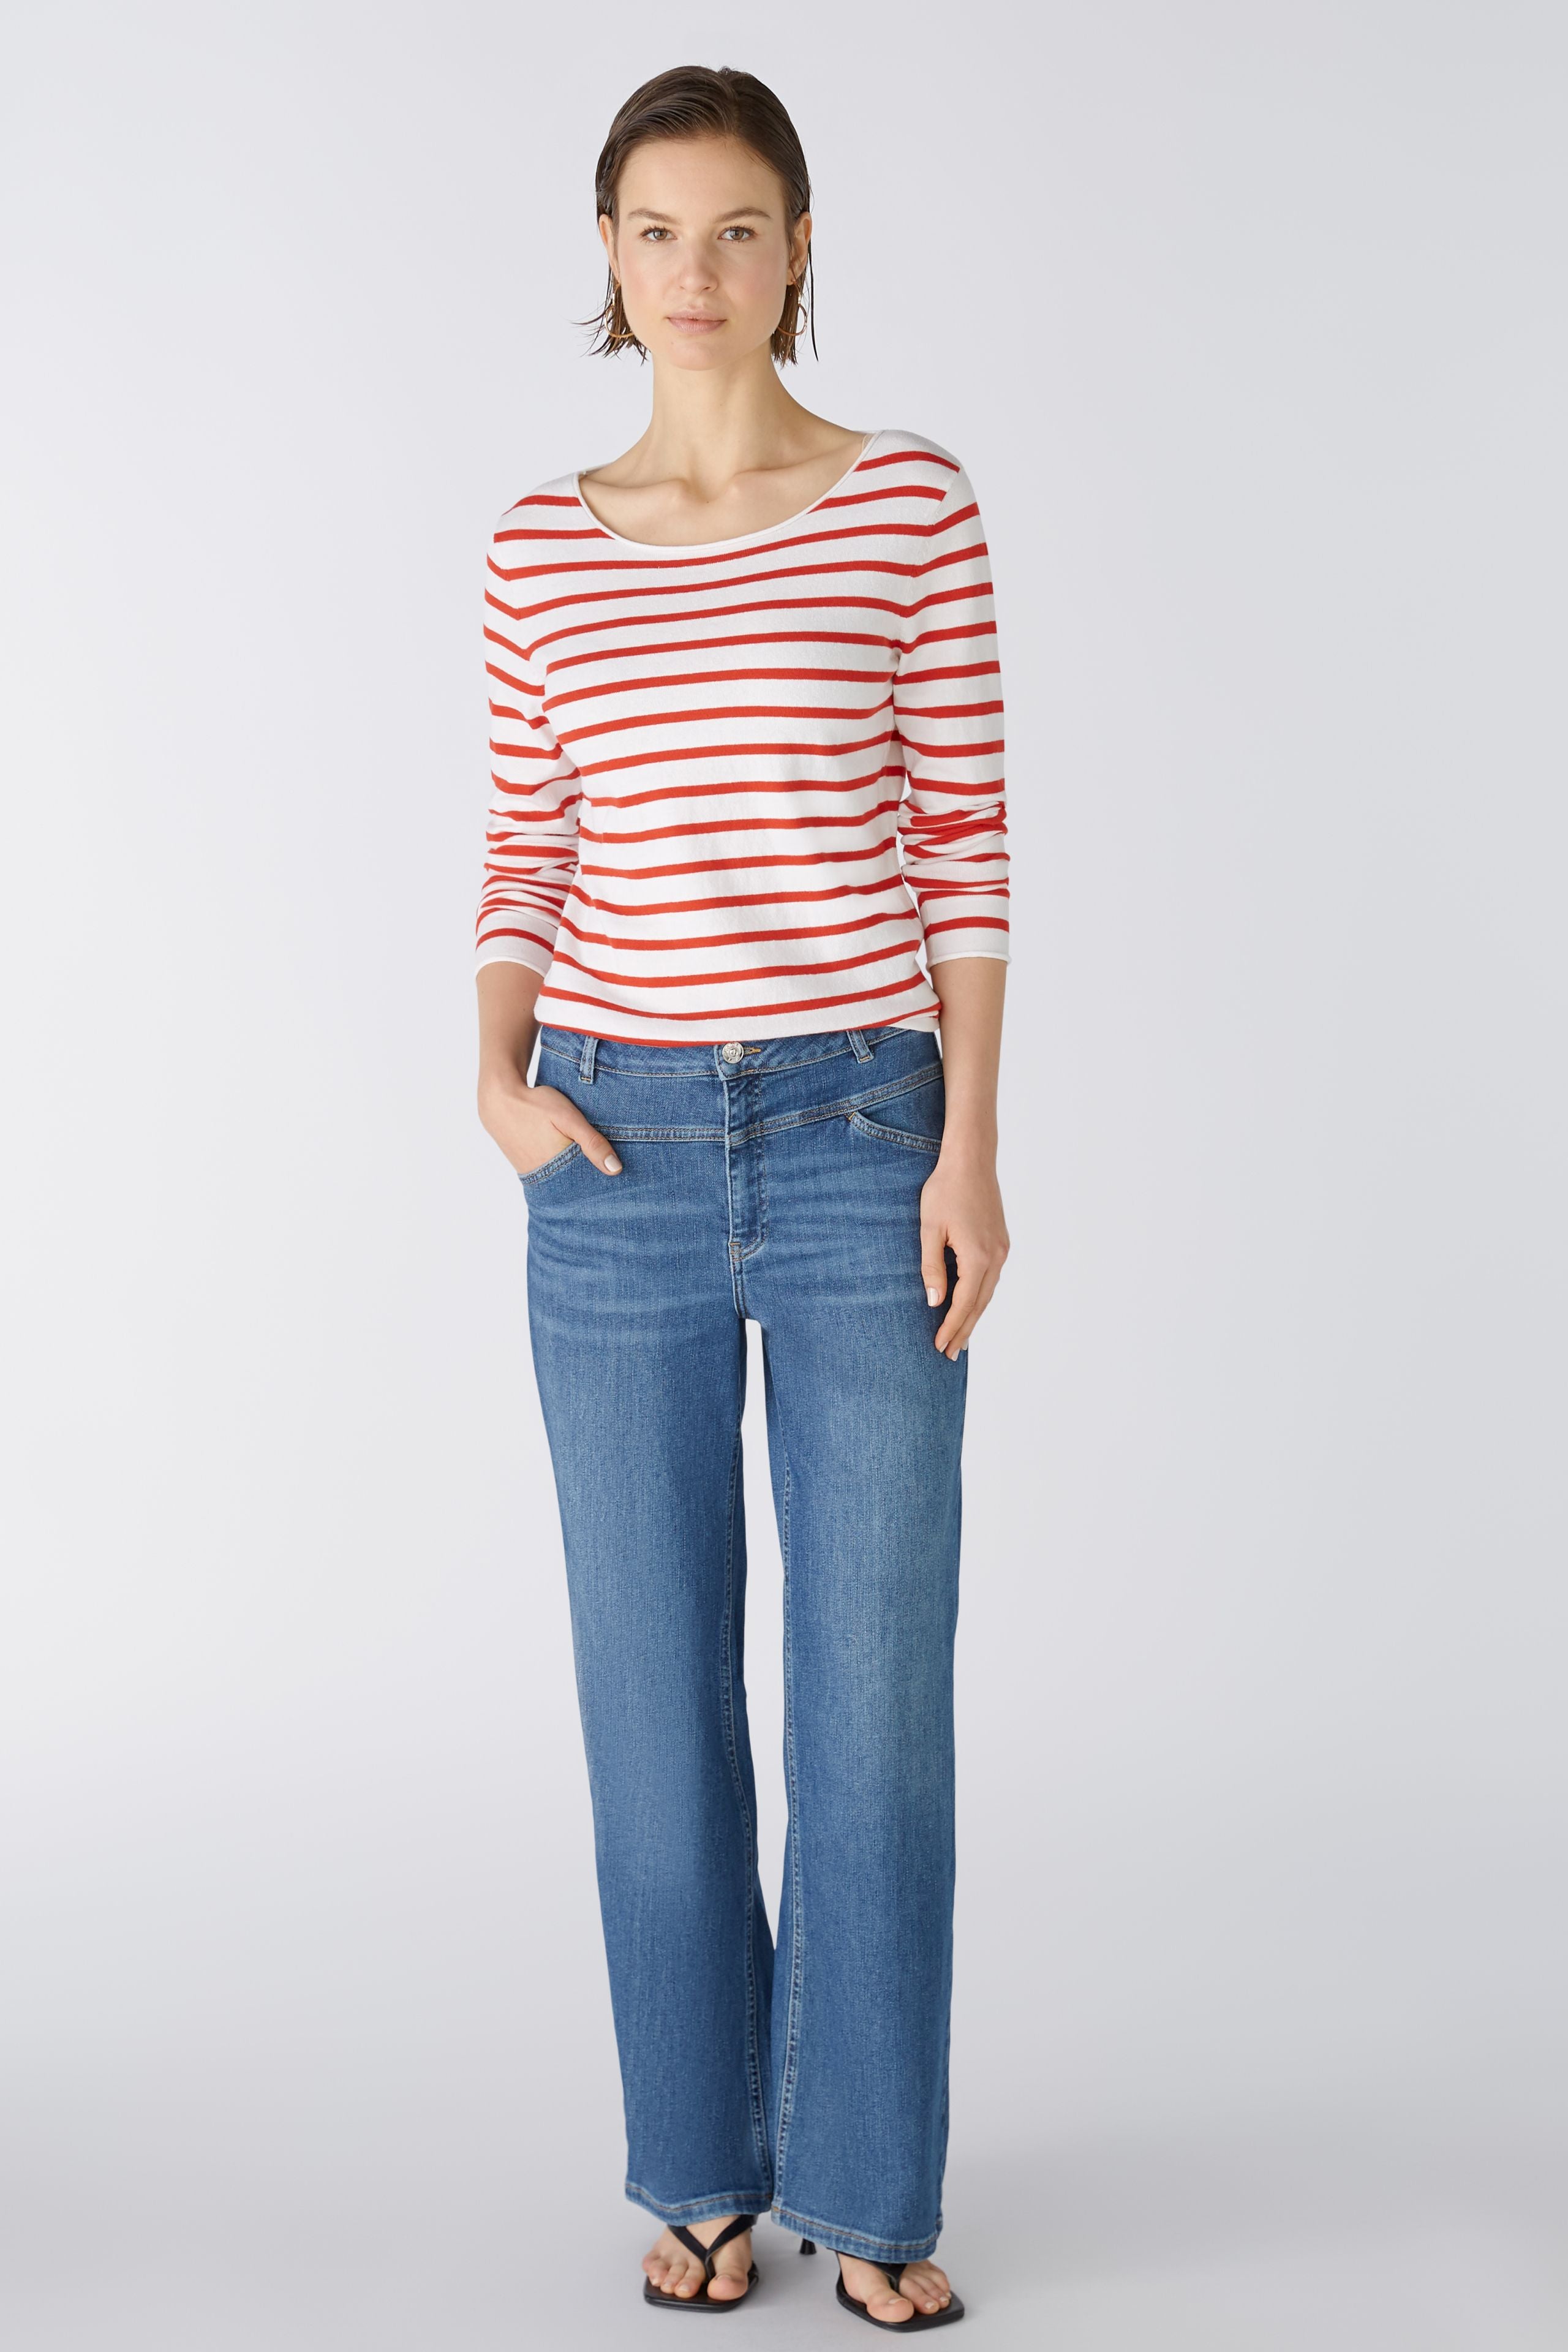 Long Sleeve Stripe Top in White/Red